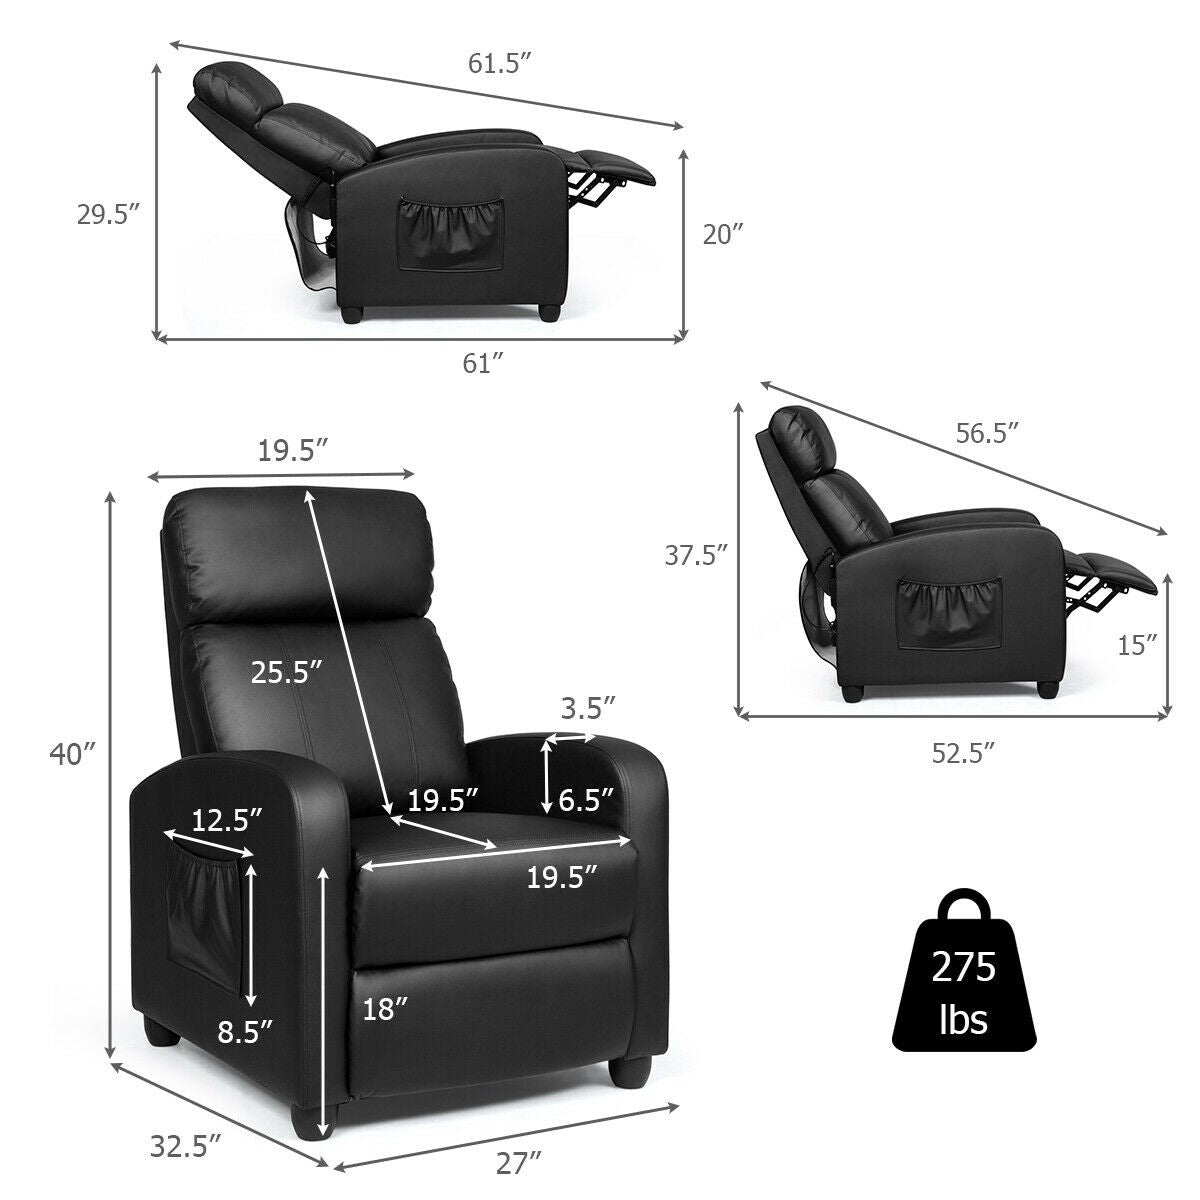 Giantex Recliner Chair for Living Room, Recliner Sofa Wingback Chair w/Massage Function